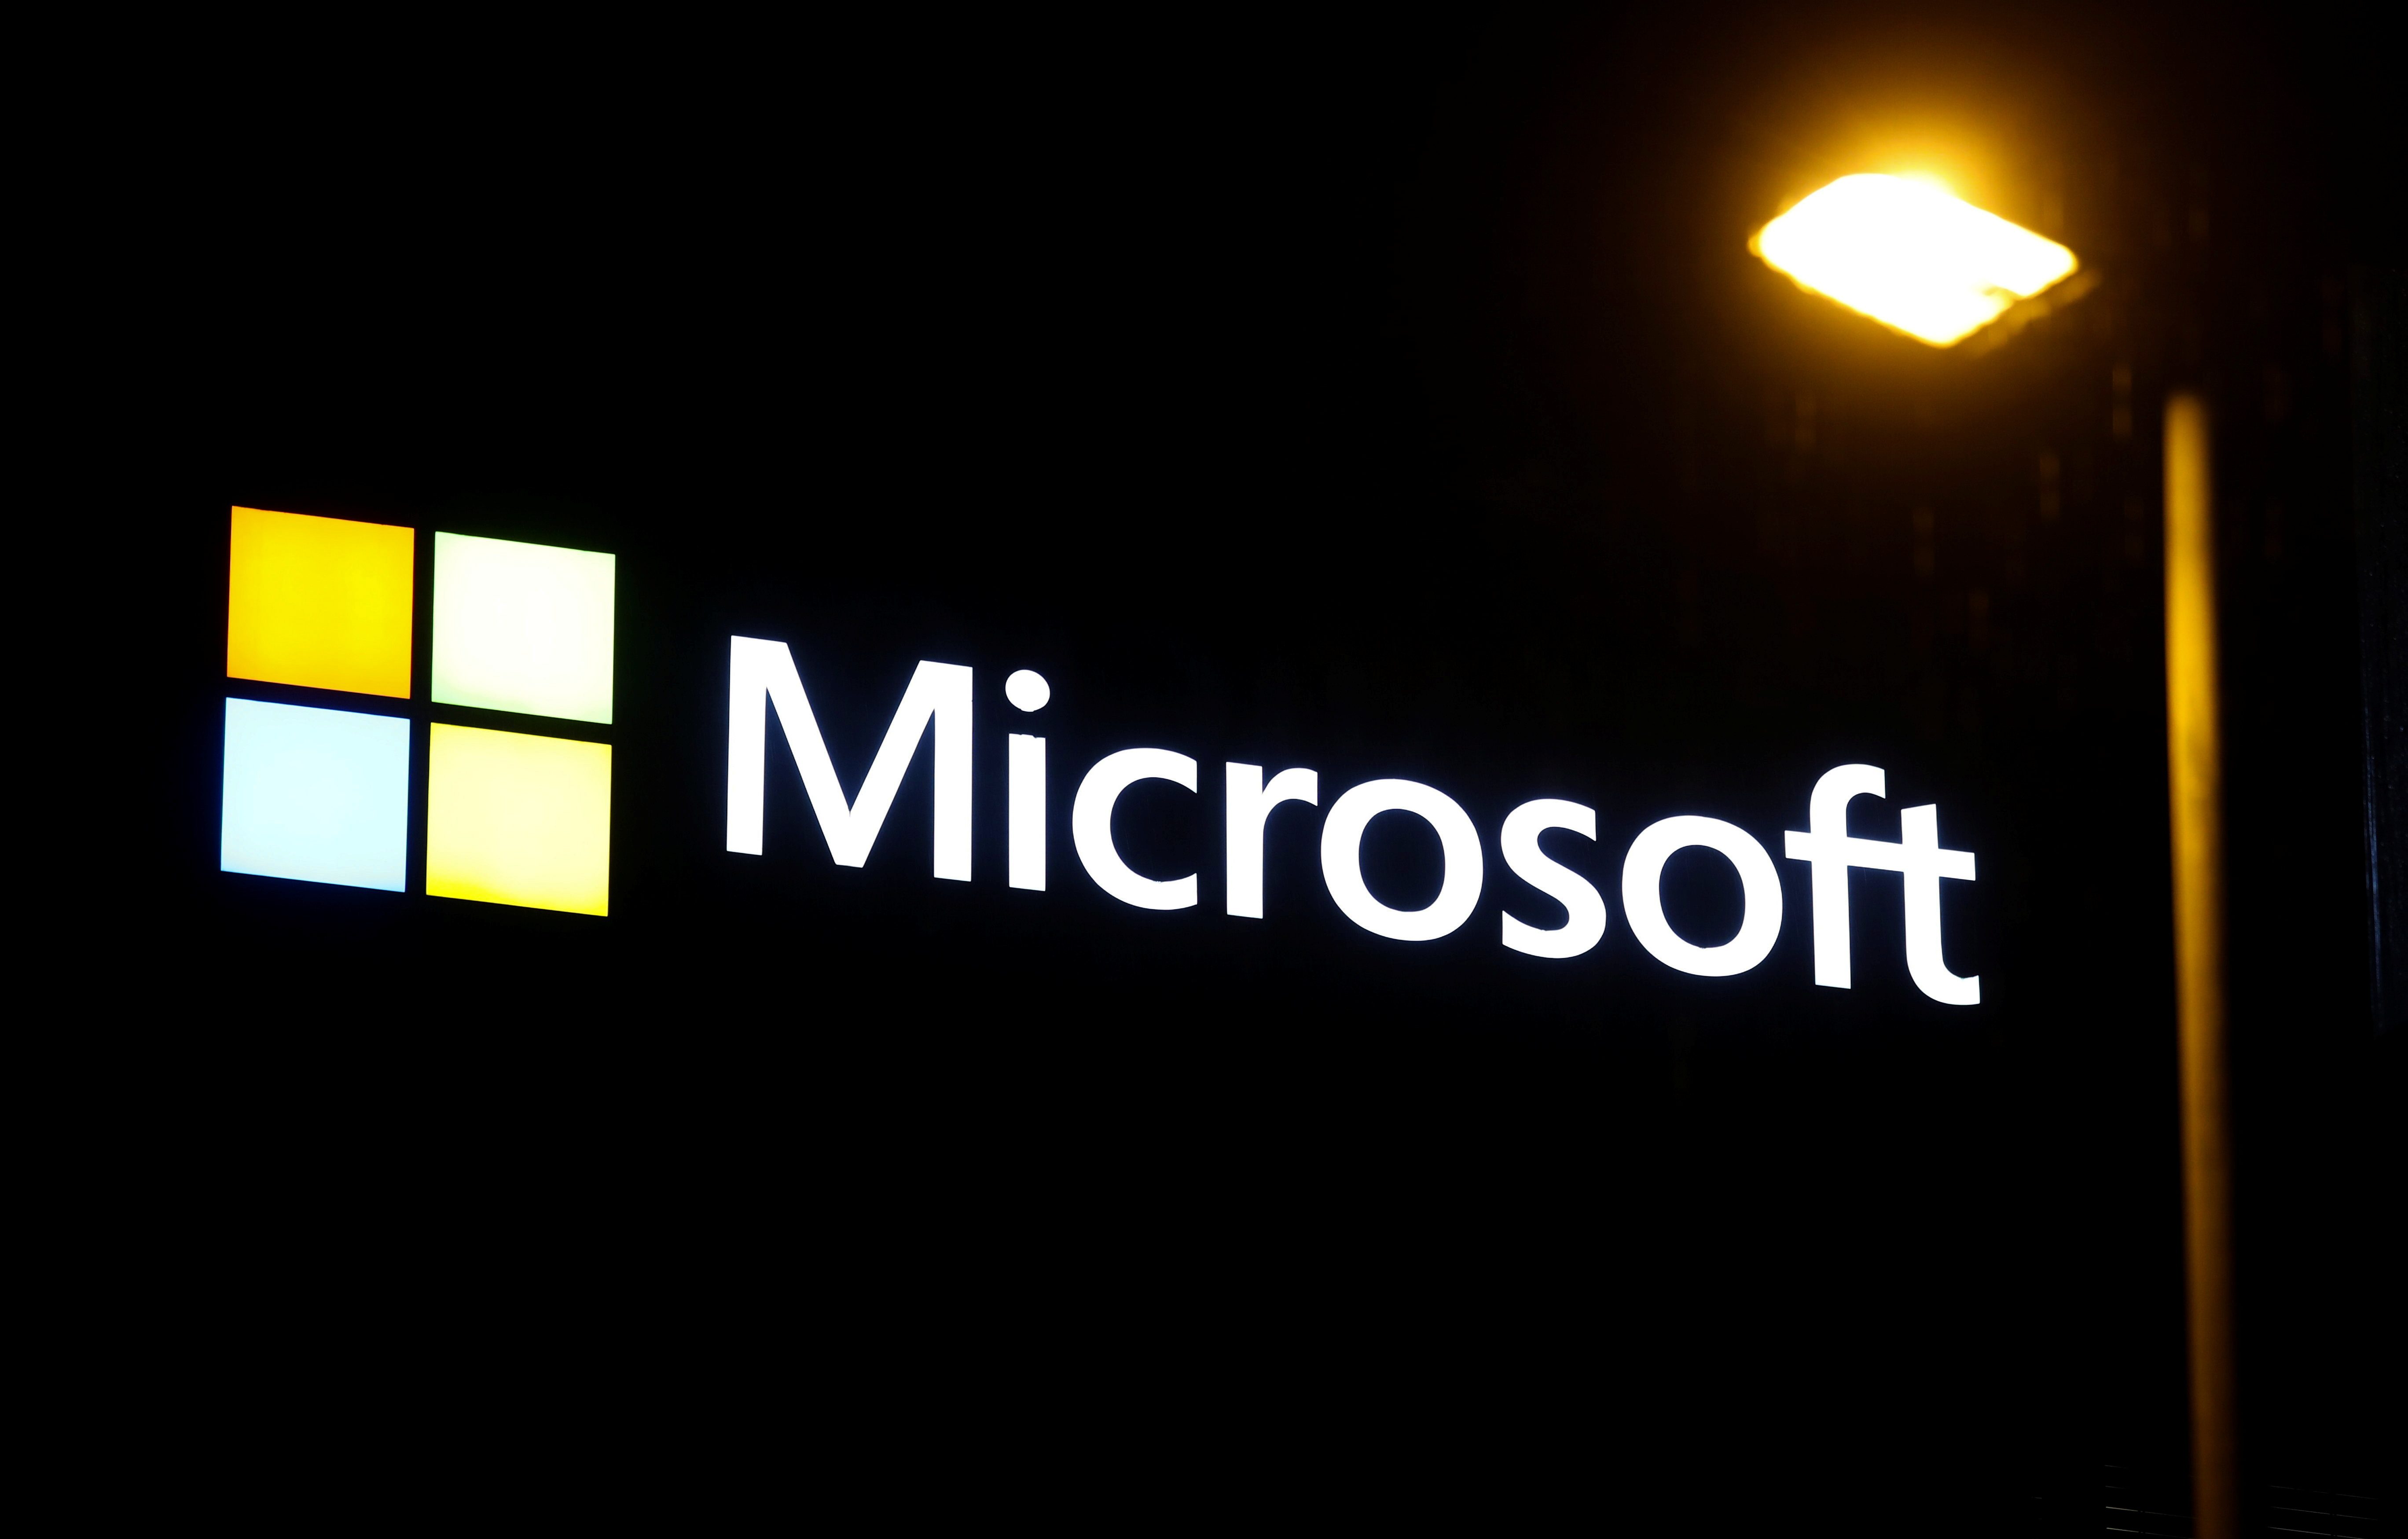 Microsoft failed to shore up defenses that could have limited SolarWinds hack – US senator